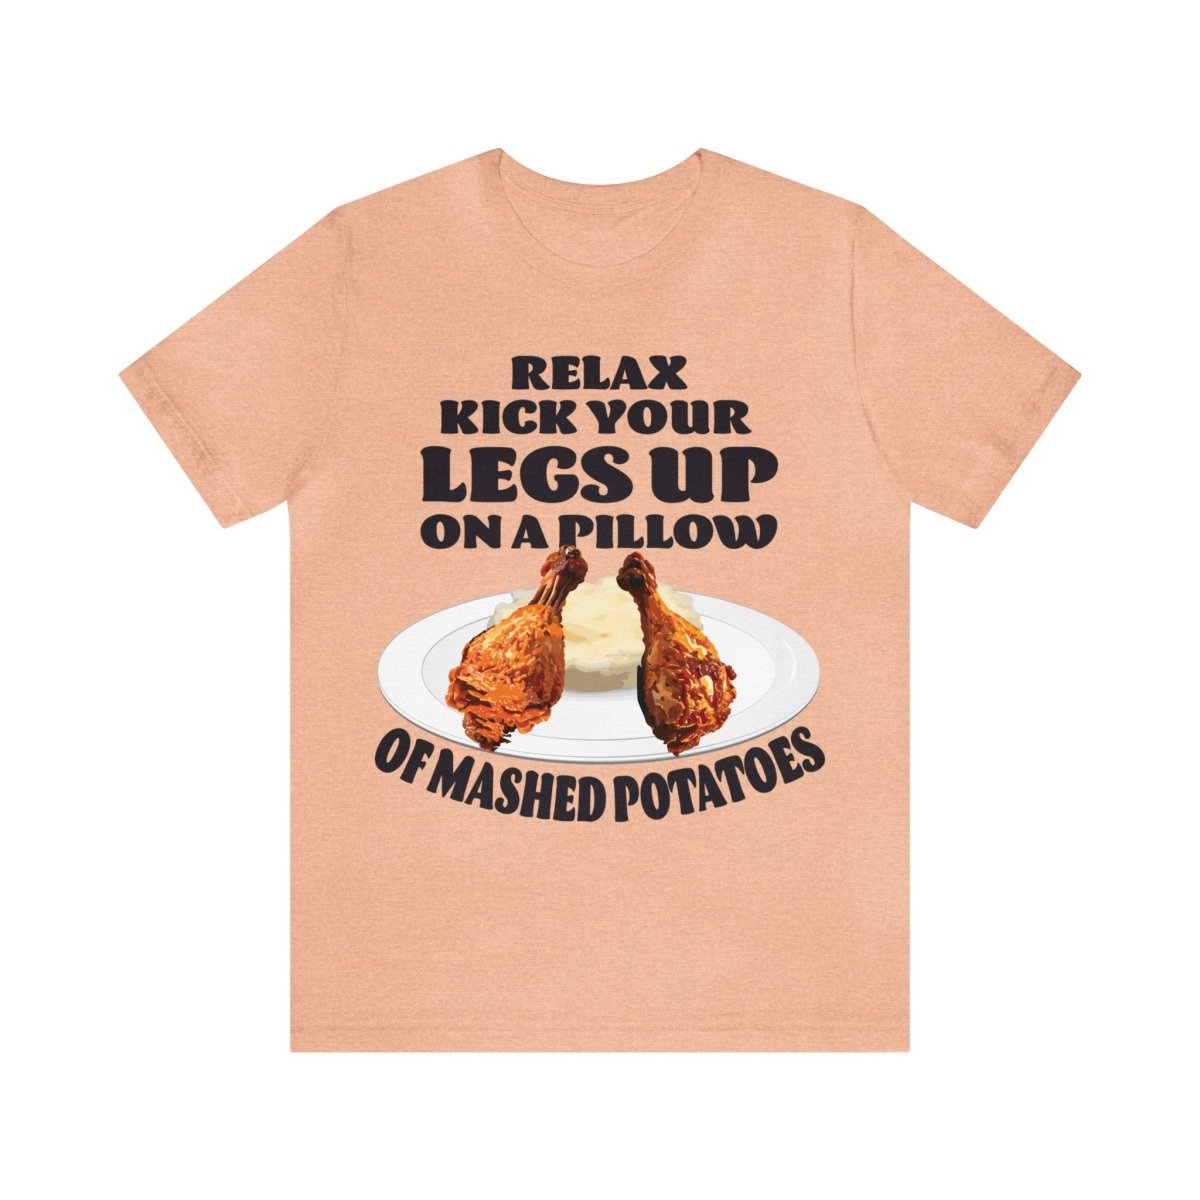 Fried Chicken Legs Up Premium T-Shirt, Relax, Kick Your Legs Up On A Pillow - Of Mashed Potatoes, Funny, Food or Cook Gift